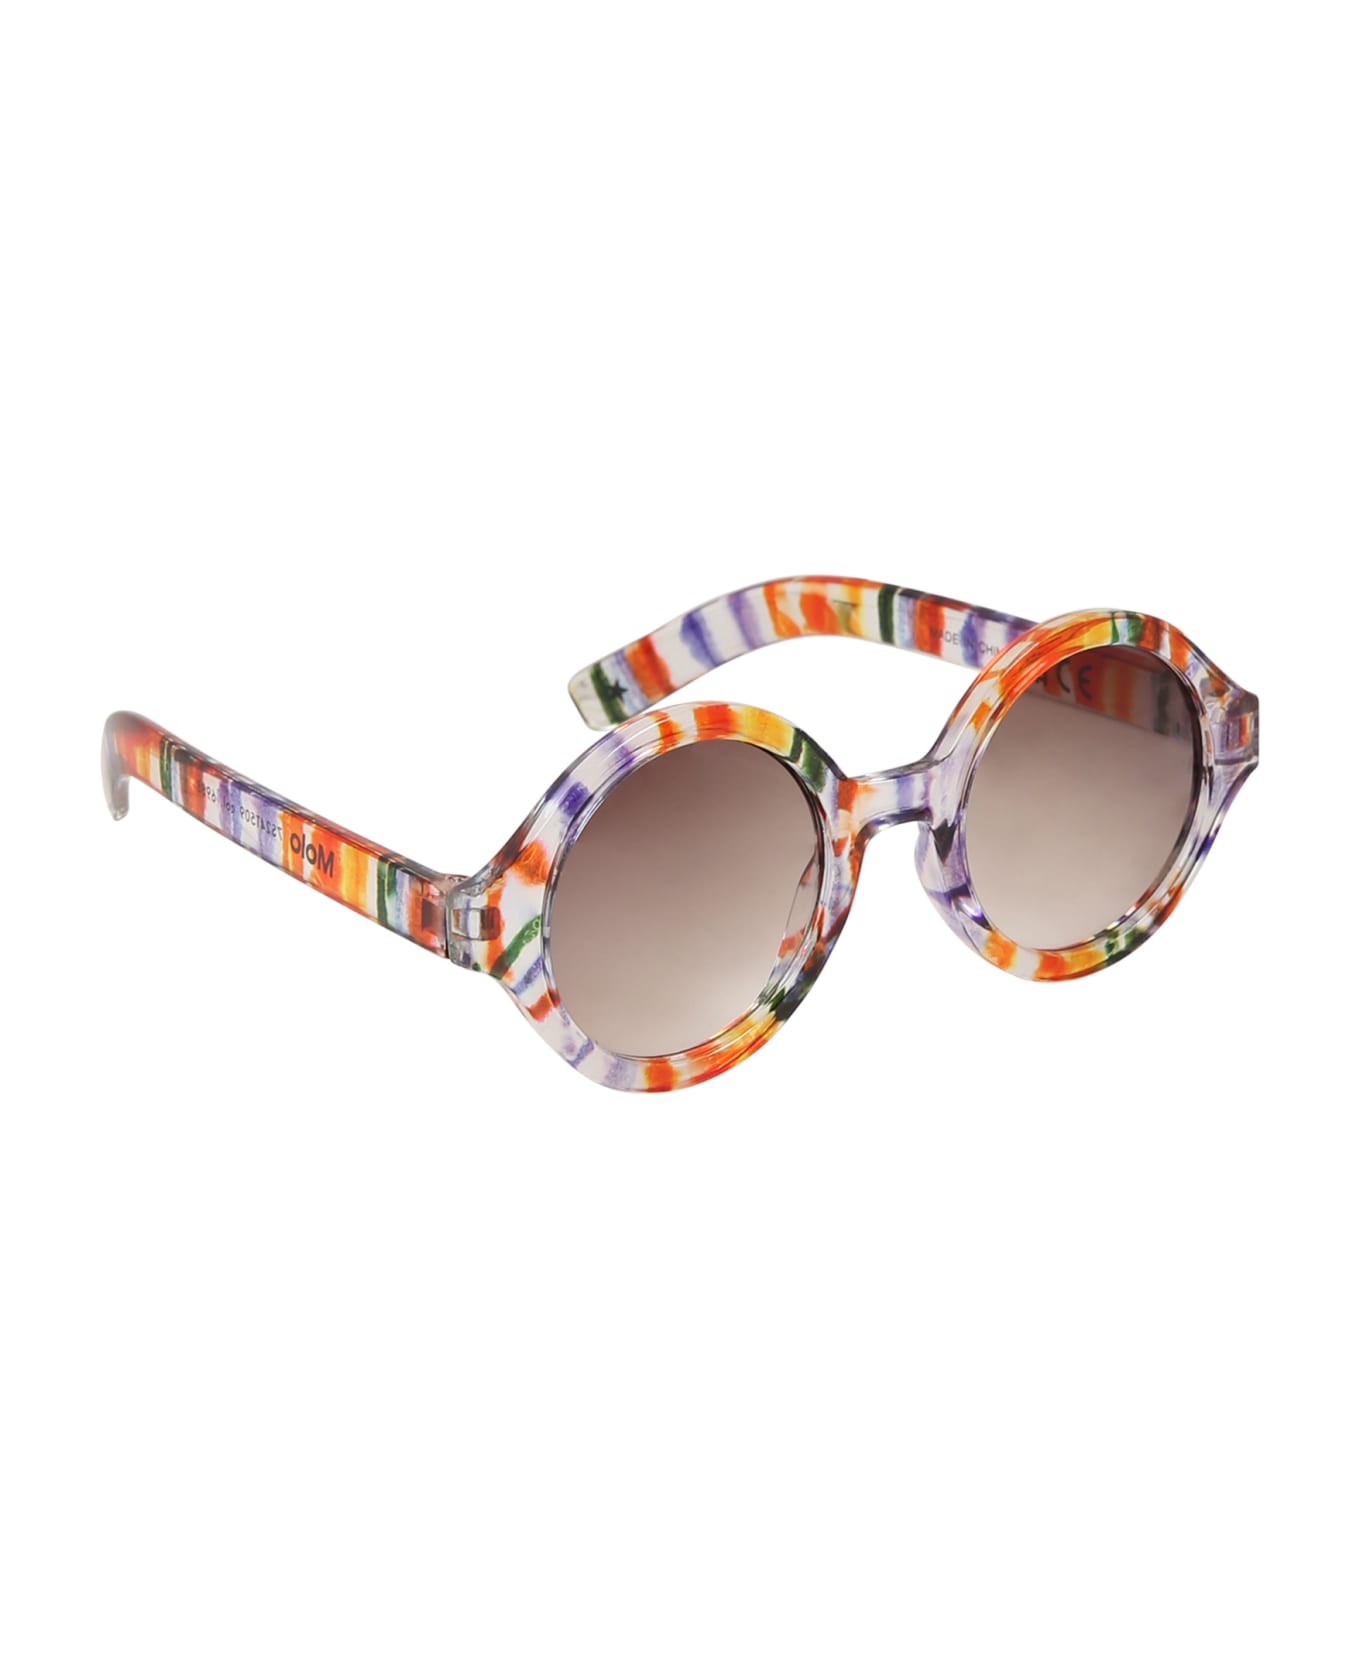 Molo Clear Shelby Sunglasses For Kids - Multicolor アクセサリー＆ギフト